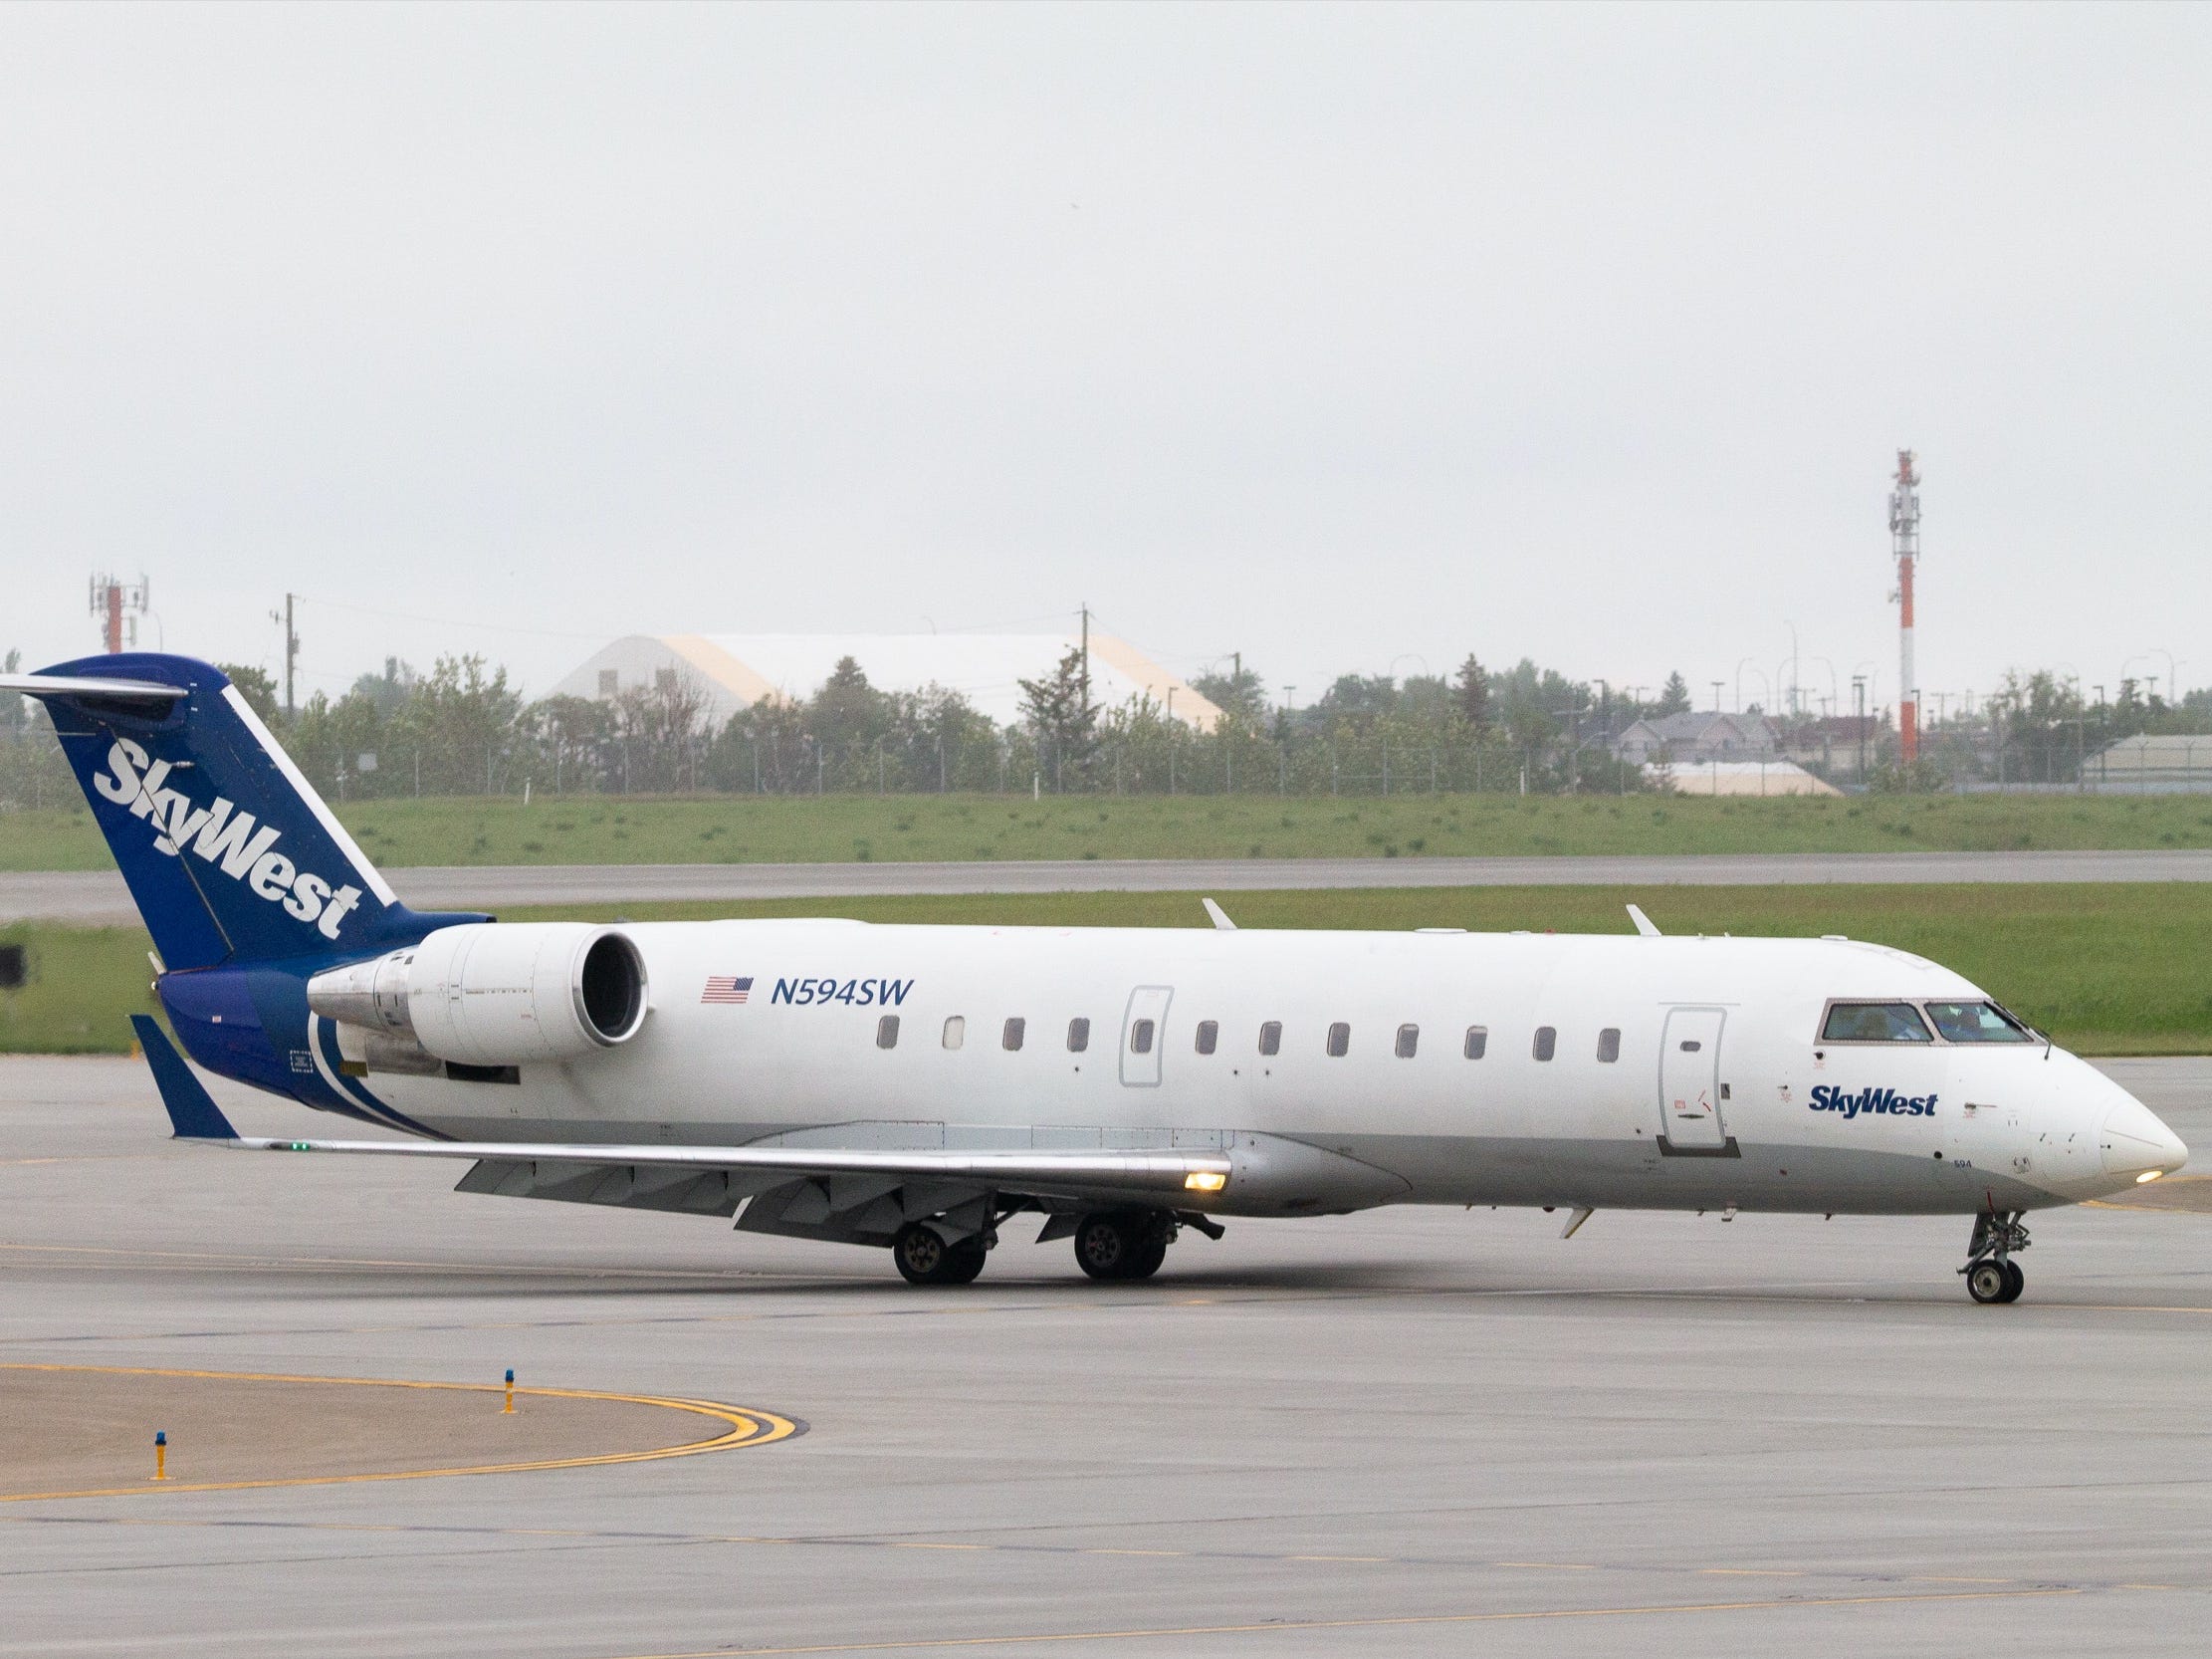 SkyWest Airlines Bombardier CRJ200 aircraft